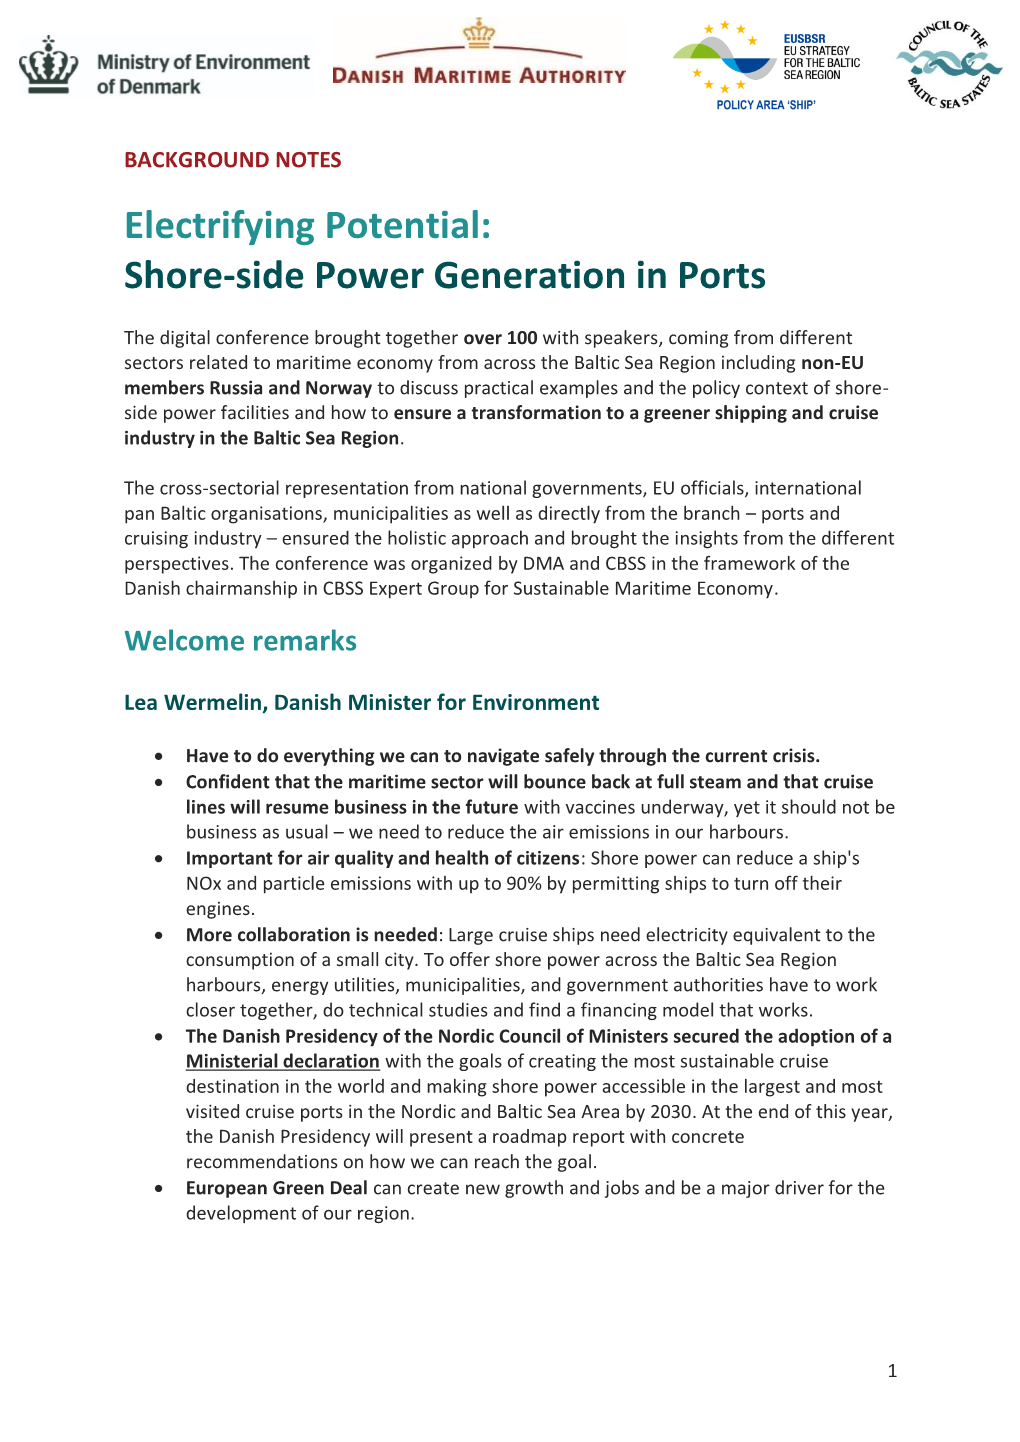 Shore-Side Power Generation in Ports